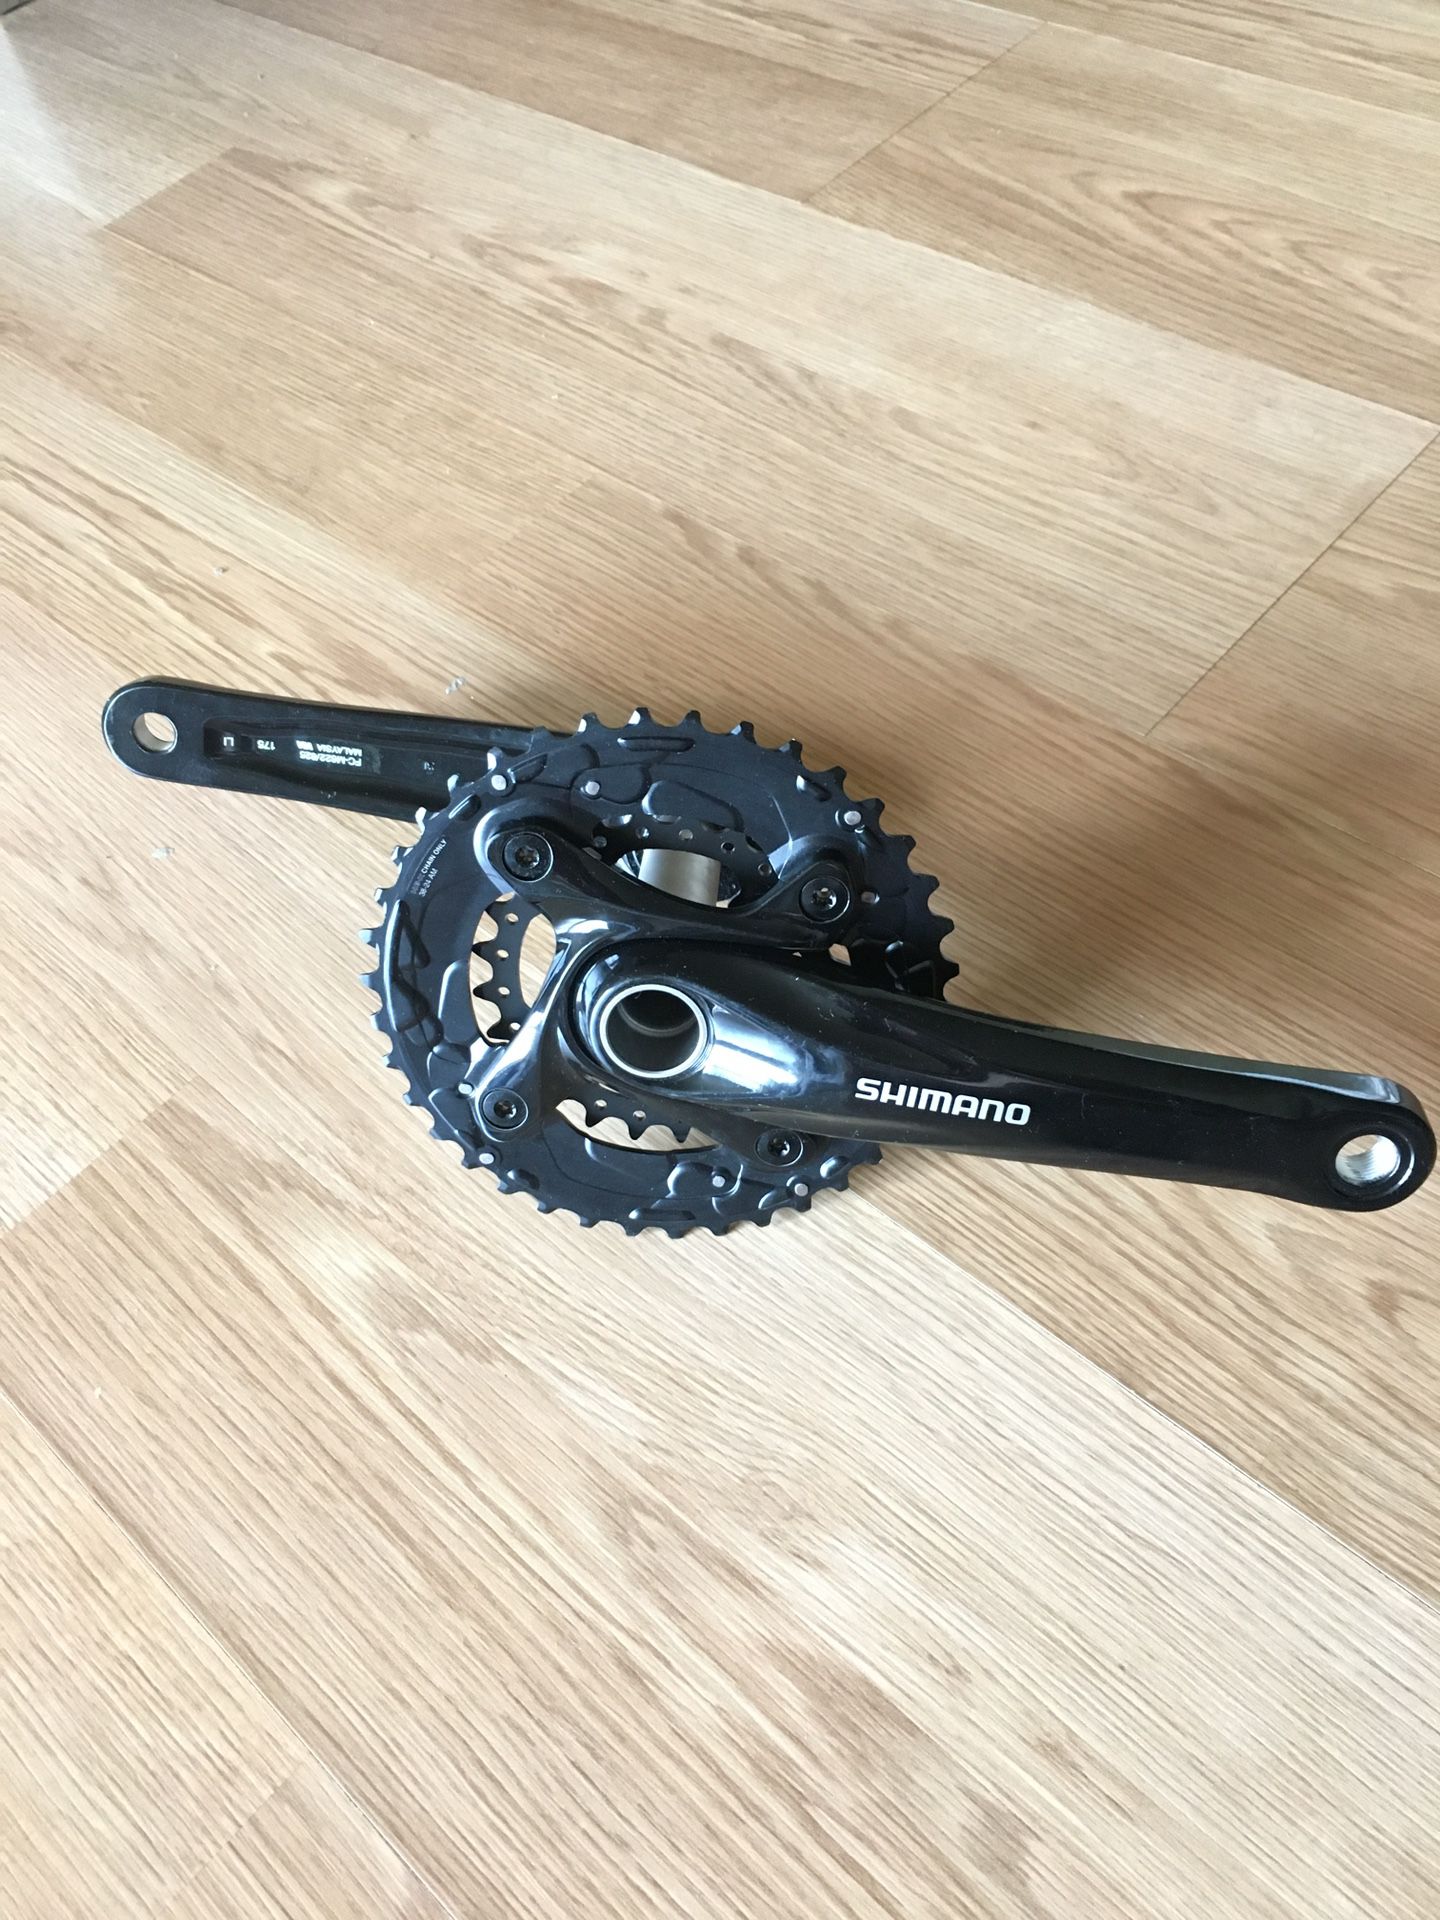 Shimano Deore Bike Crank Set  - Holowtech - Up to 11 speed - 38/24 T - 175 mm - Brand new - Bike Cycling parts  - If the listing is up and you can see